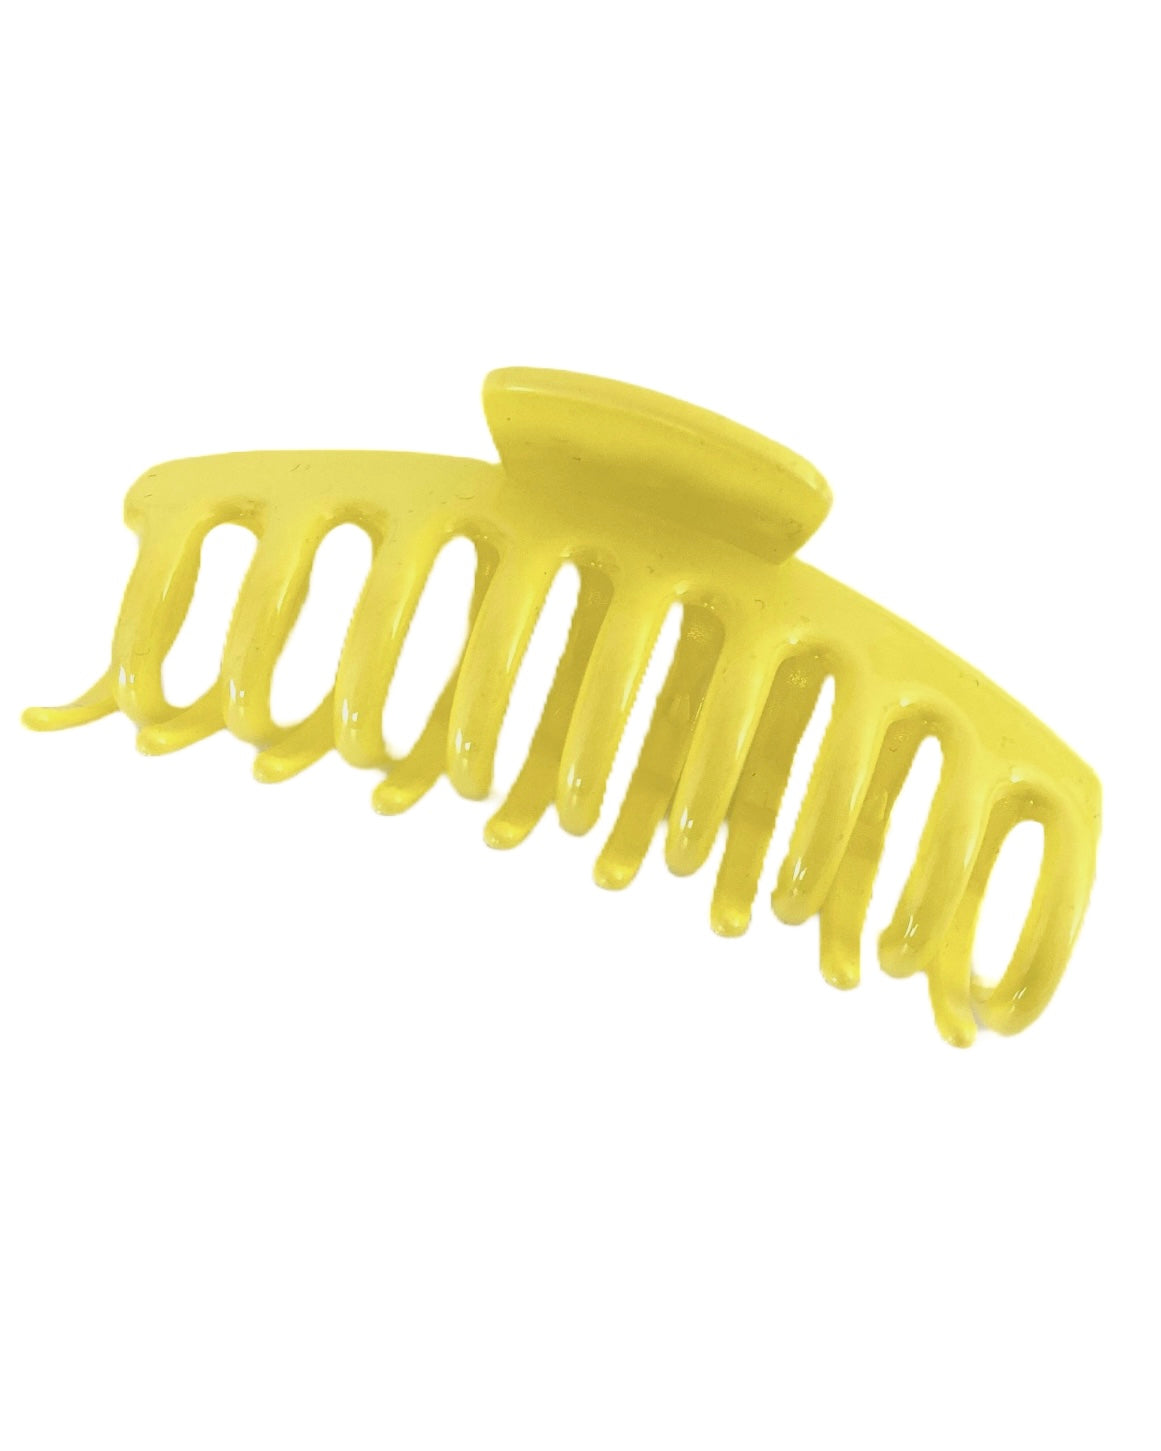 "MARIE-CLAIRE" HAARCLIP YELLOW SHINY (11 CM)